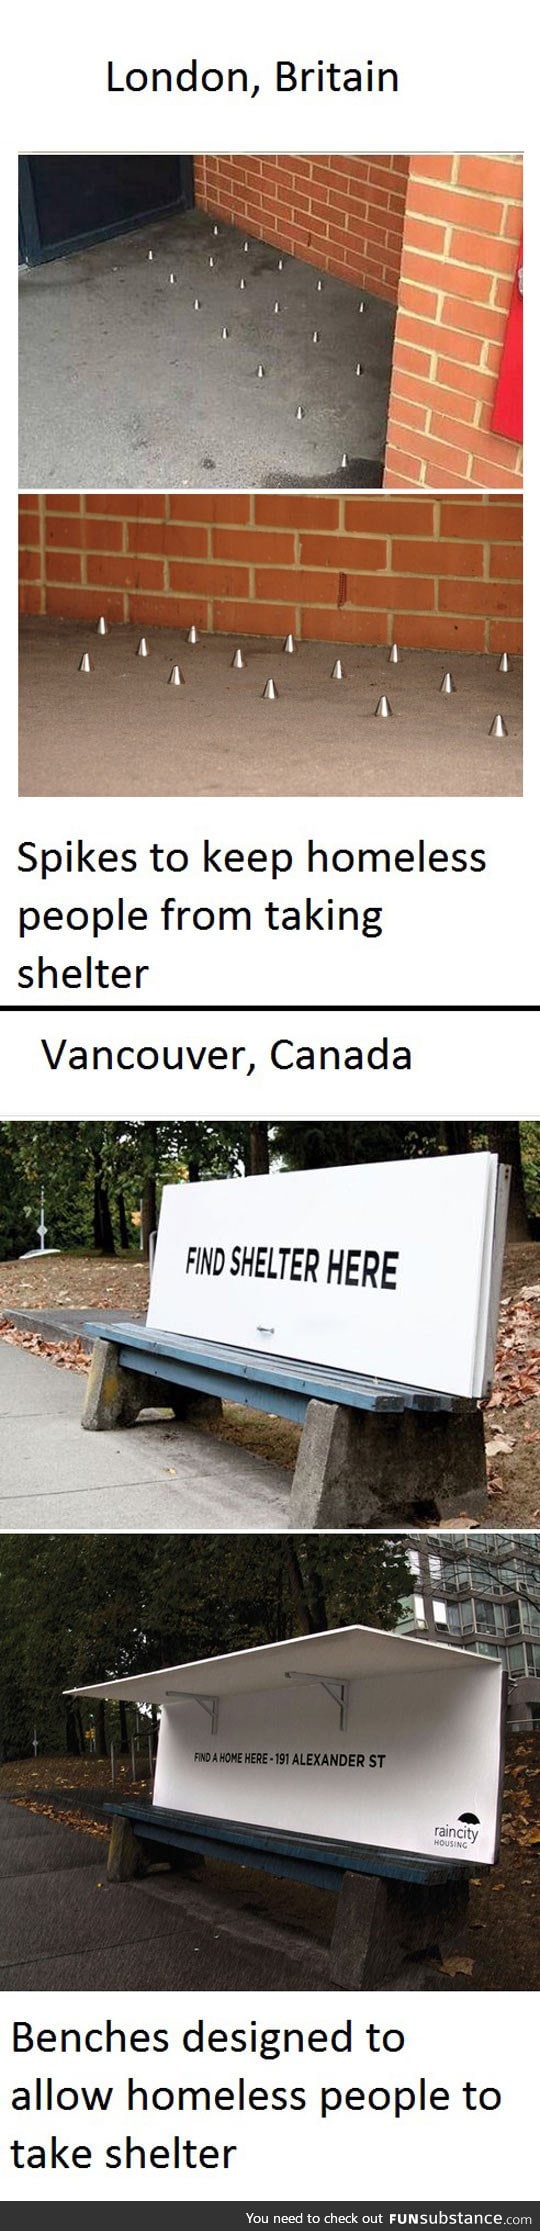 Kindness once again spotted in canada